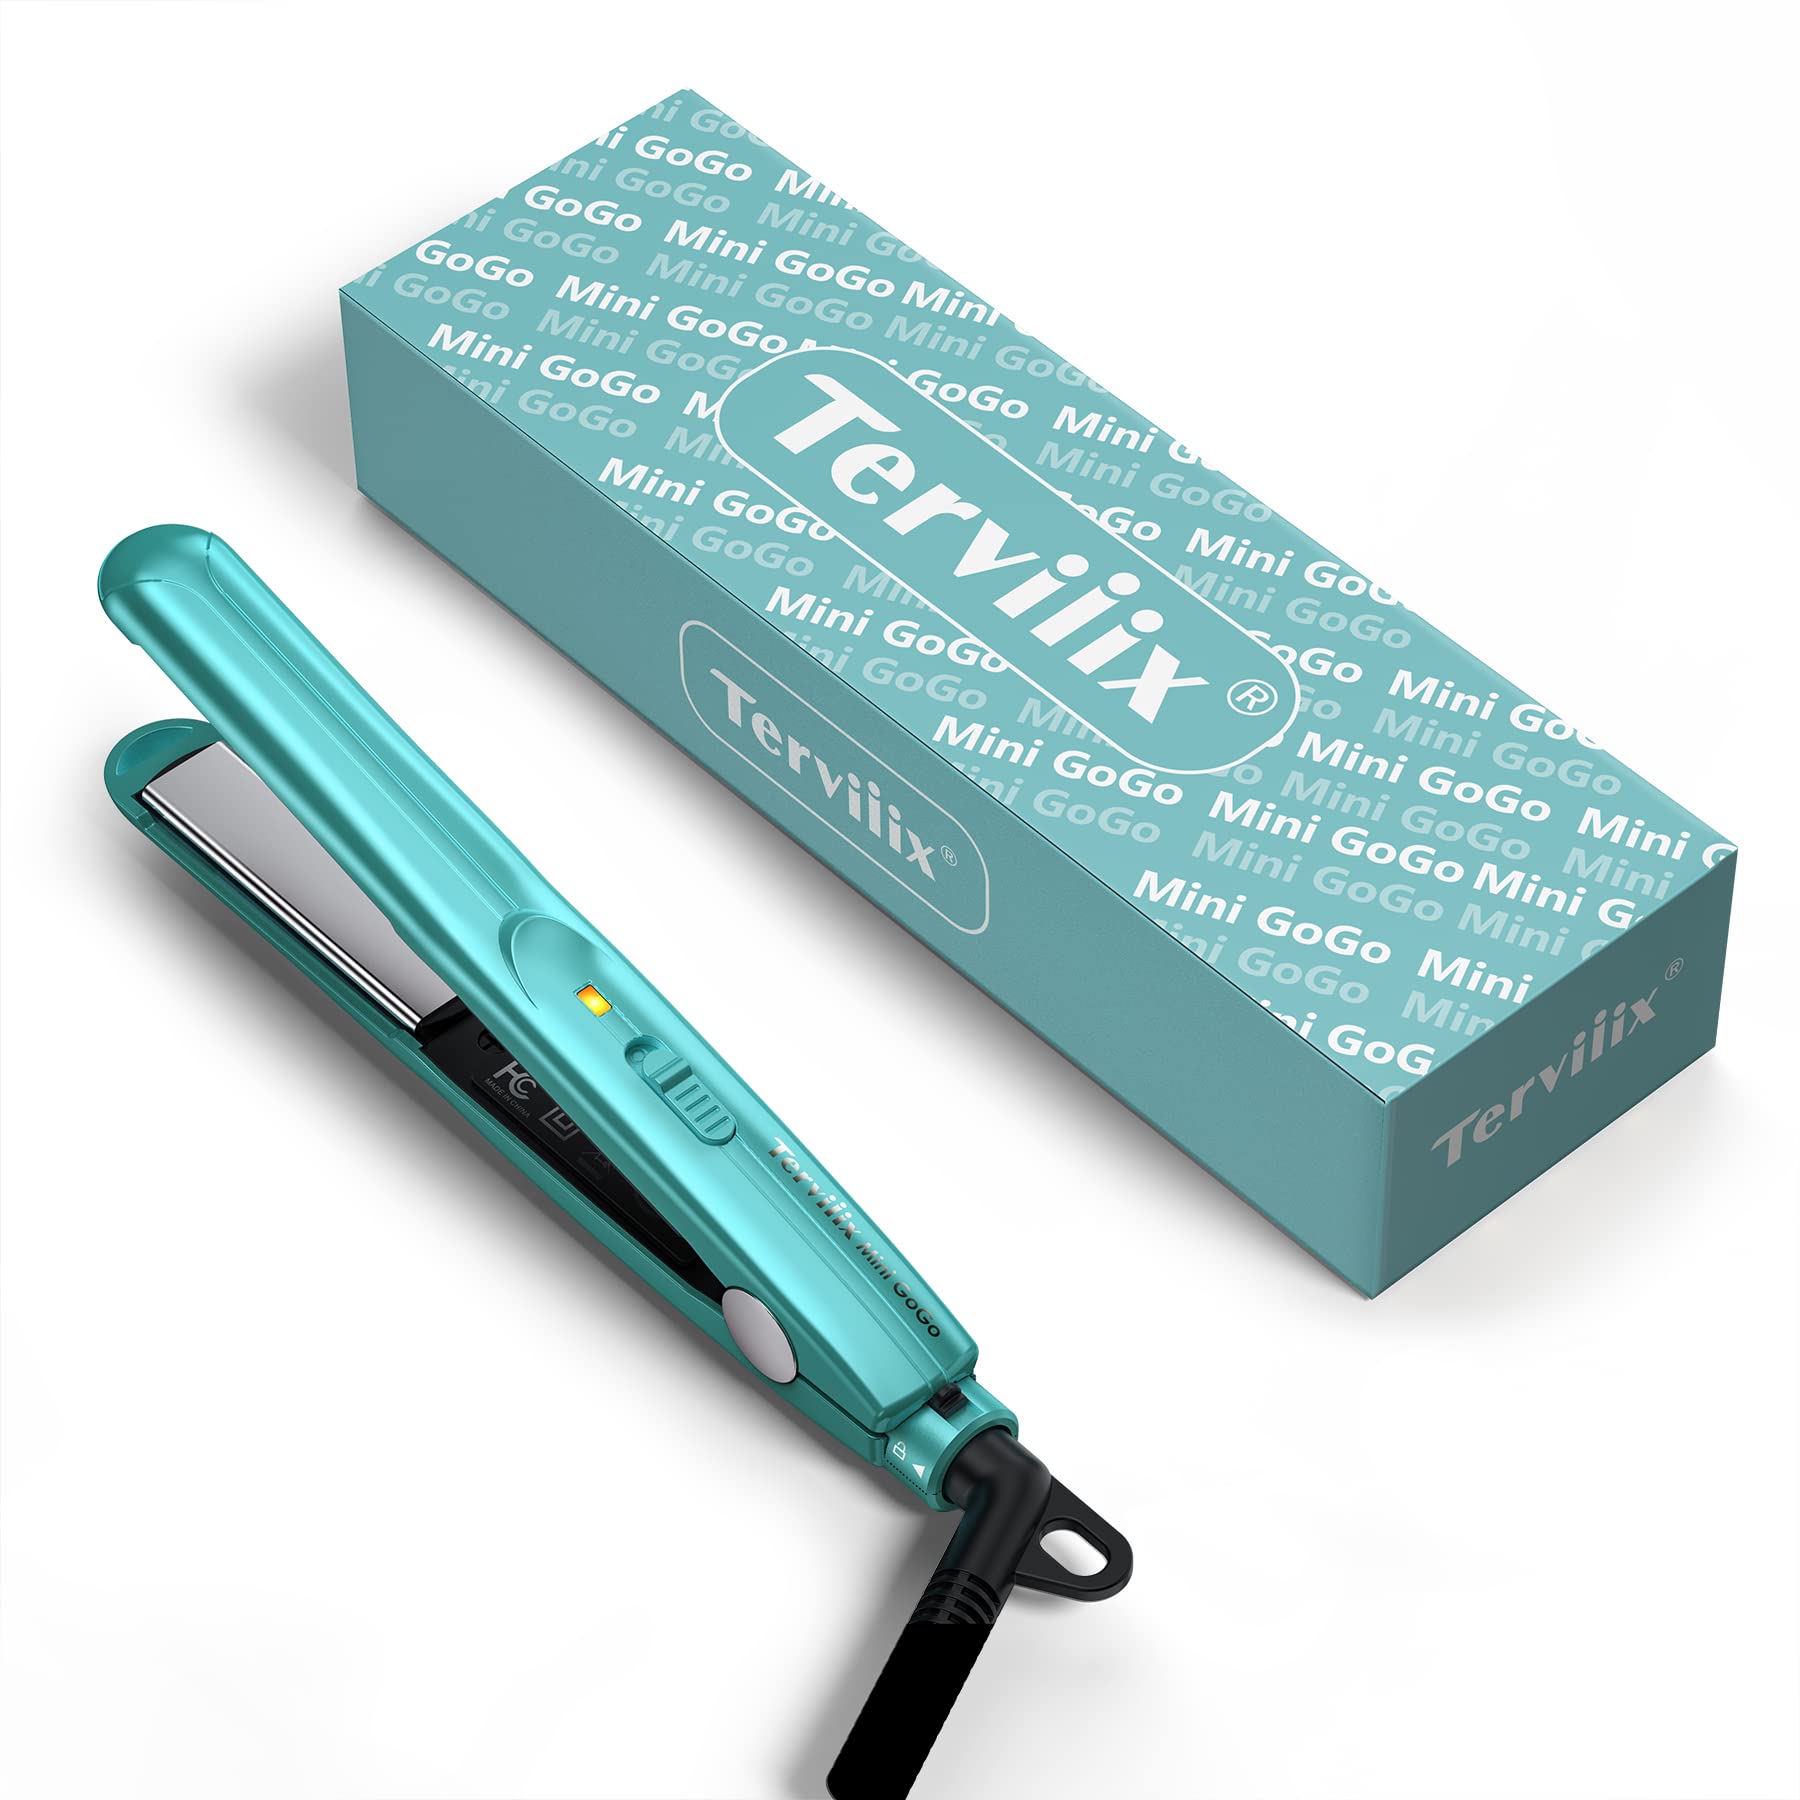 Terviiix Mini Hair Straightener, Ceramic Mini Flat Irons for Short Hair/Curls Bangs/Edges, Lightweight & Portable, 1/2 '' Small Straightening Irons, Worldwide Voltage for Travel, Storage Pouch, Blue